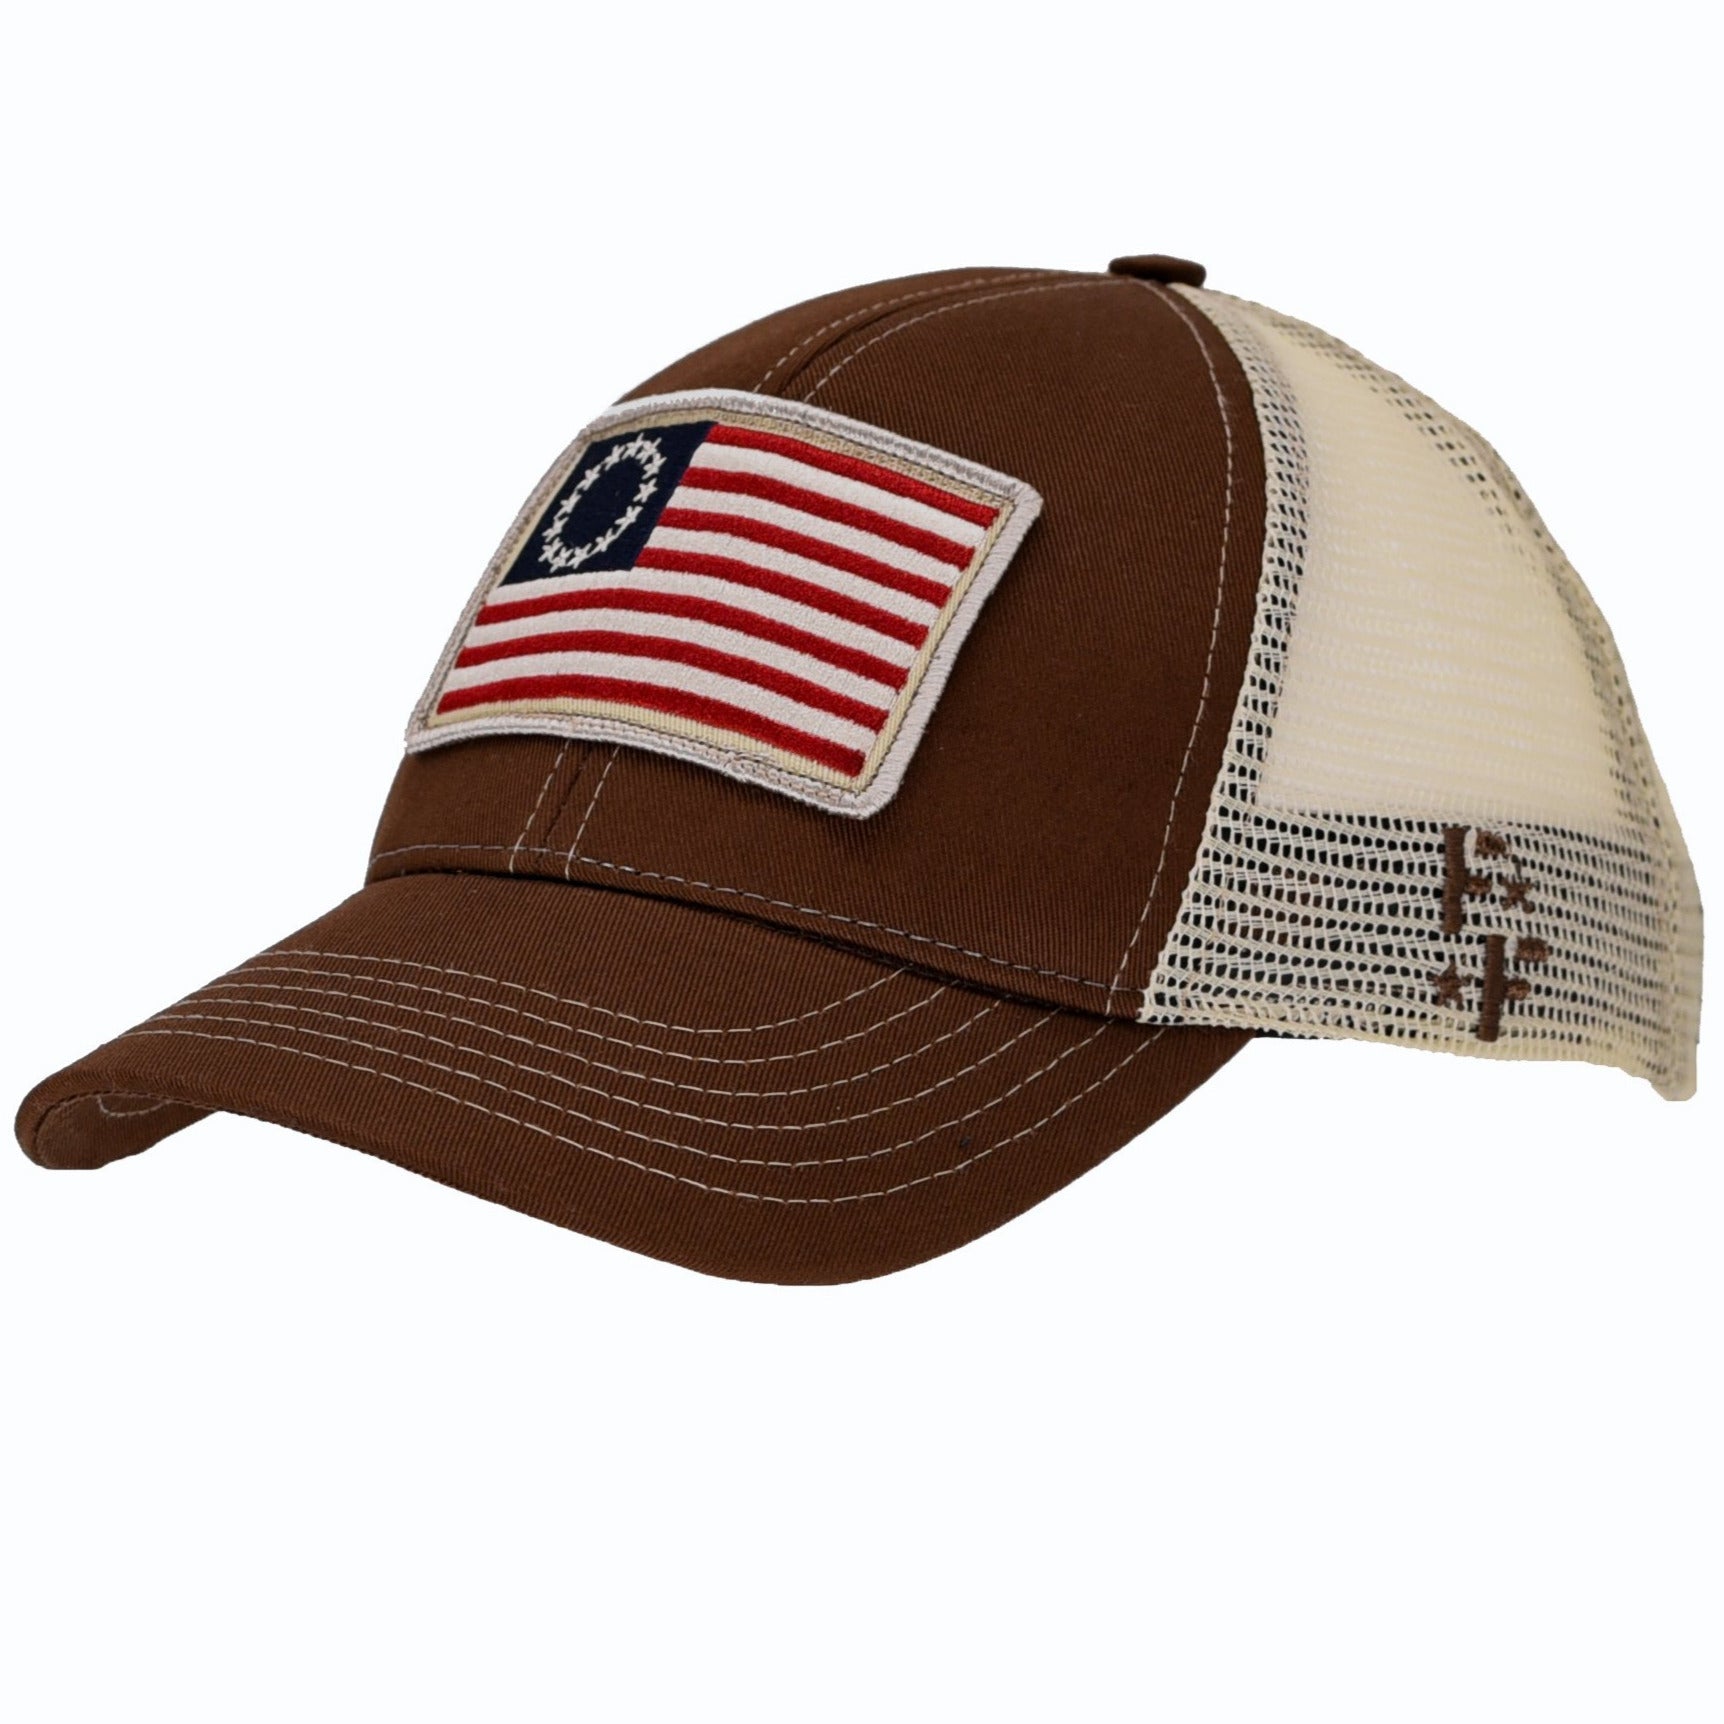 Betsy Ross Flag Patch Trucker Hat